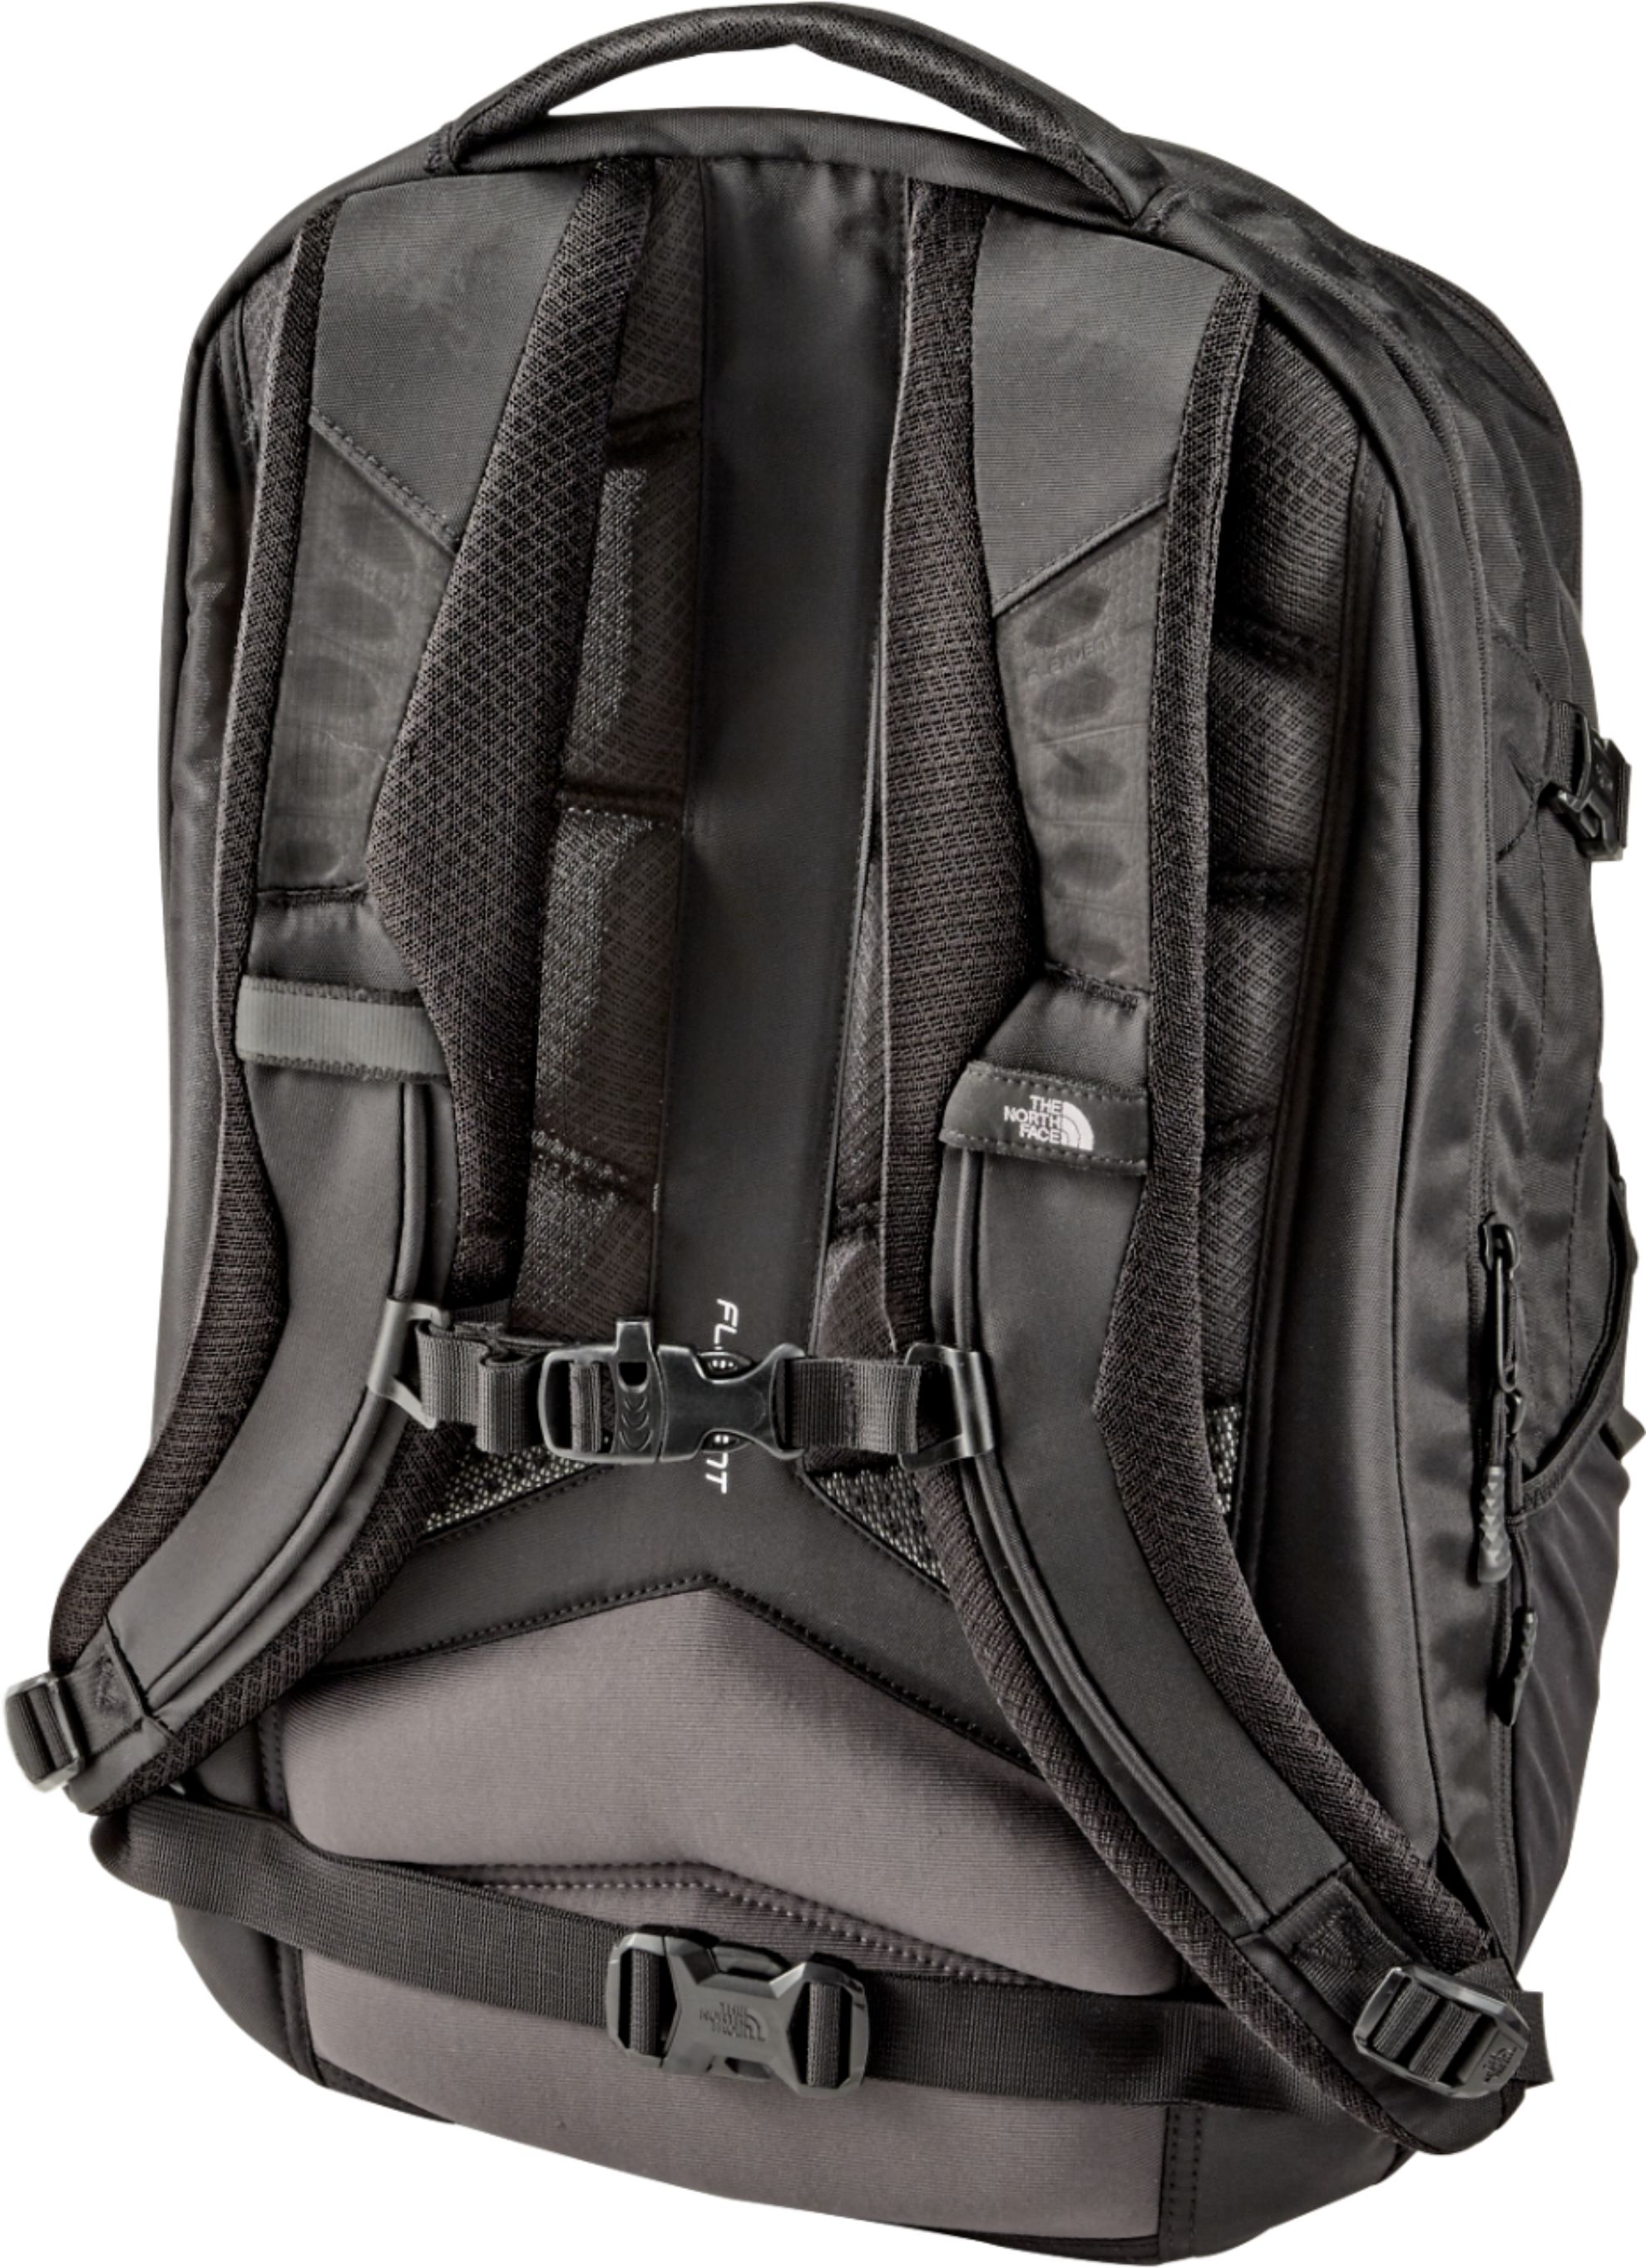 north face backpack best buy